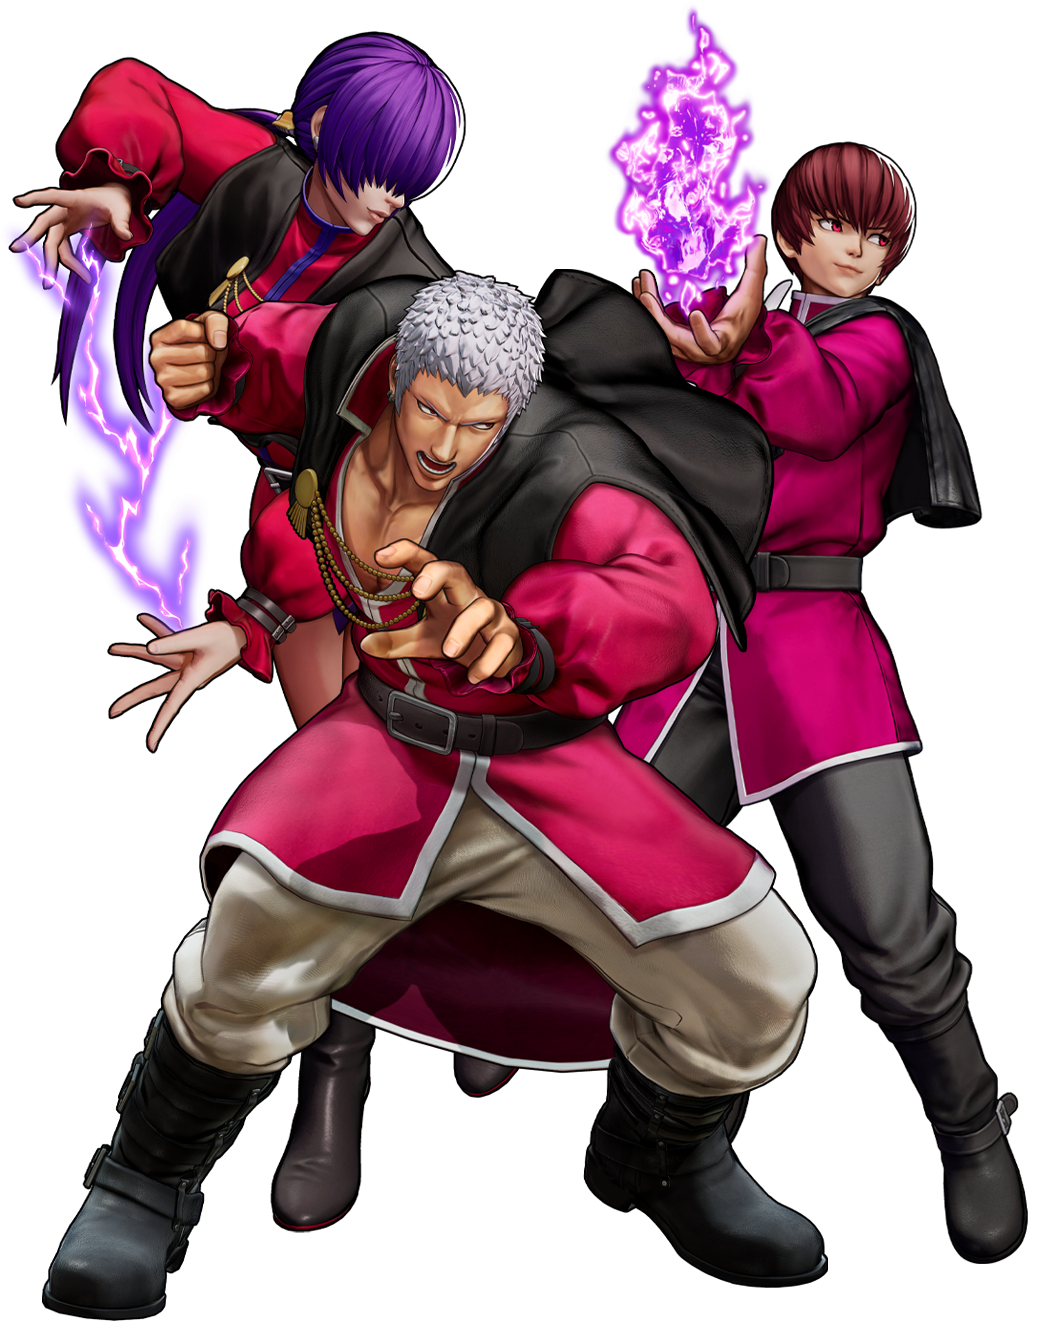 The King of Fighters Allstar continues its quest to cross over